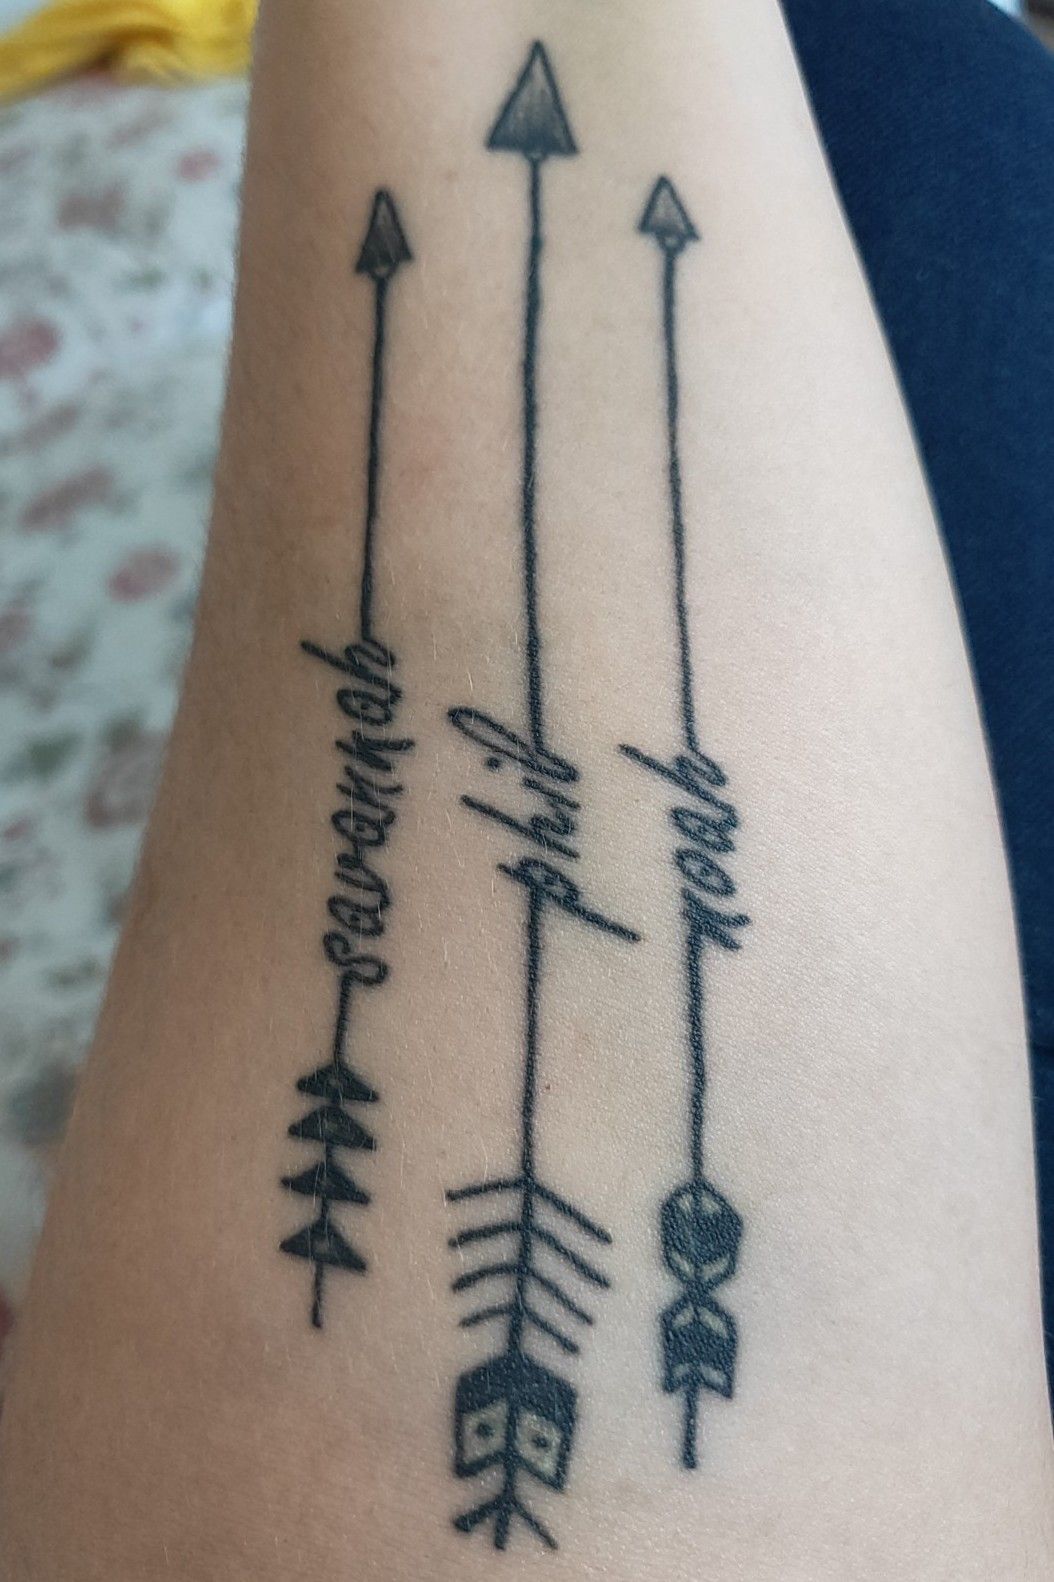 Tattoo uploaded by Jem Wyld • Family tattoo with kids and hubby's names # arrows #family • Tattoodo